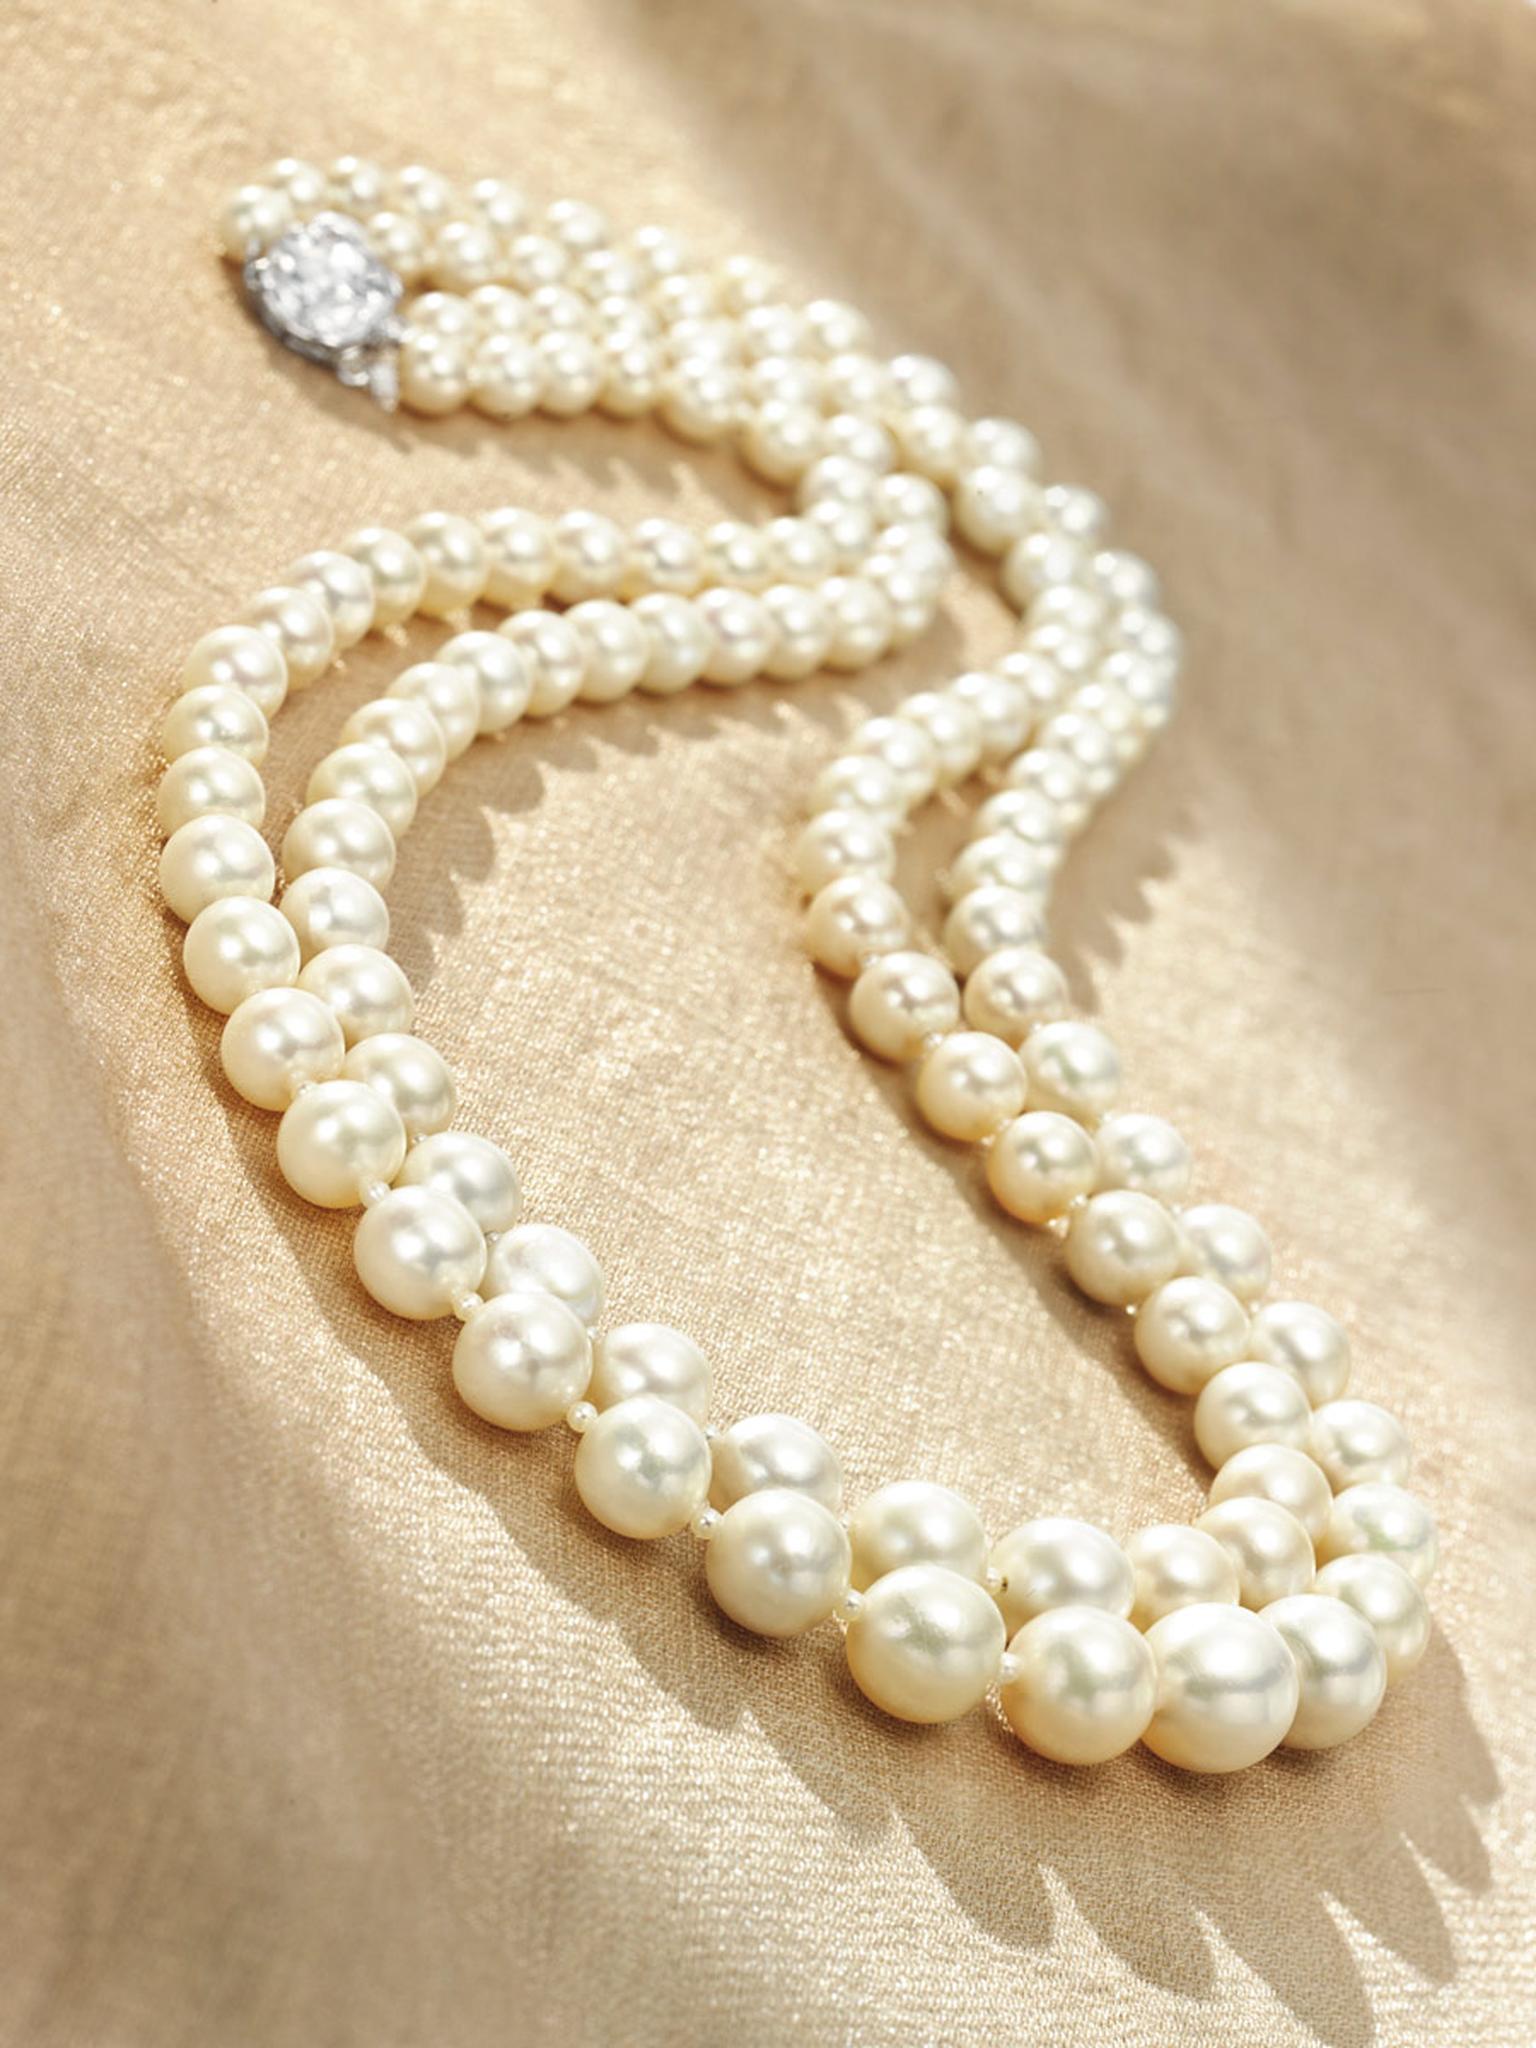 Christies-double-strand-natural-pearl-necklace.jpg